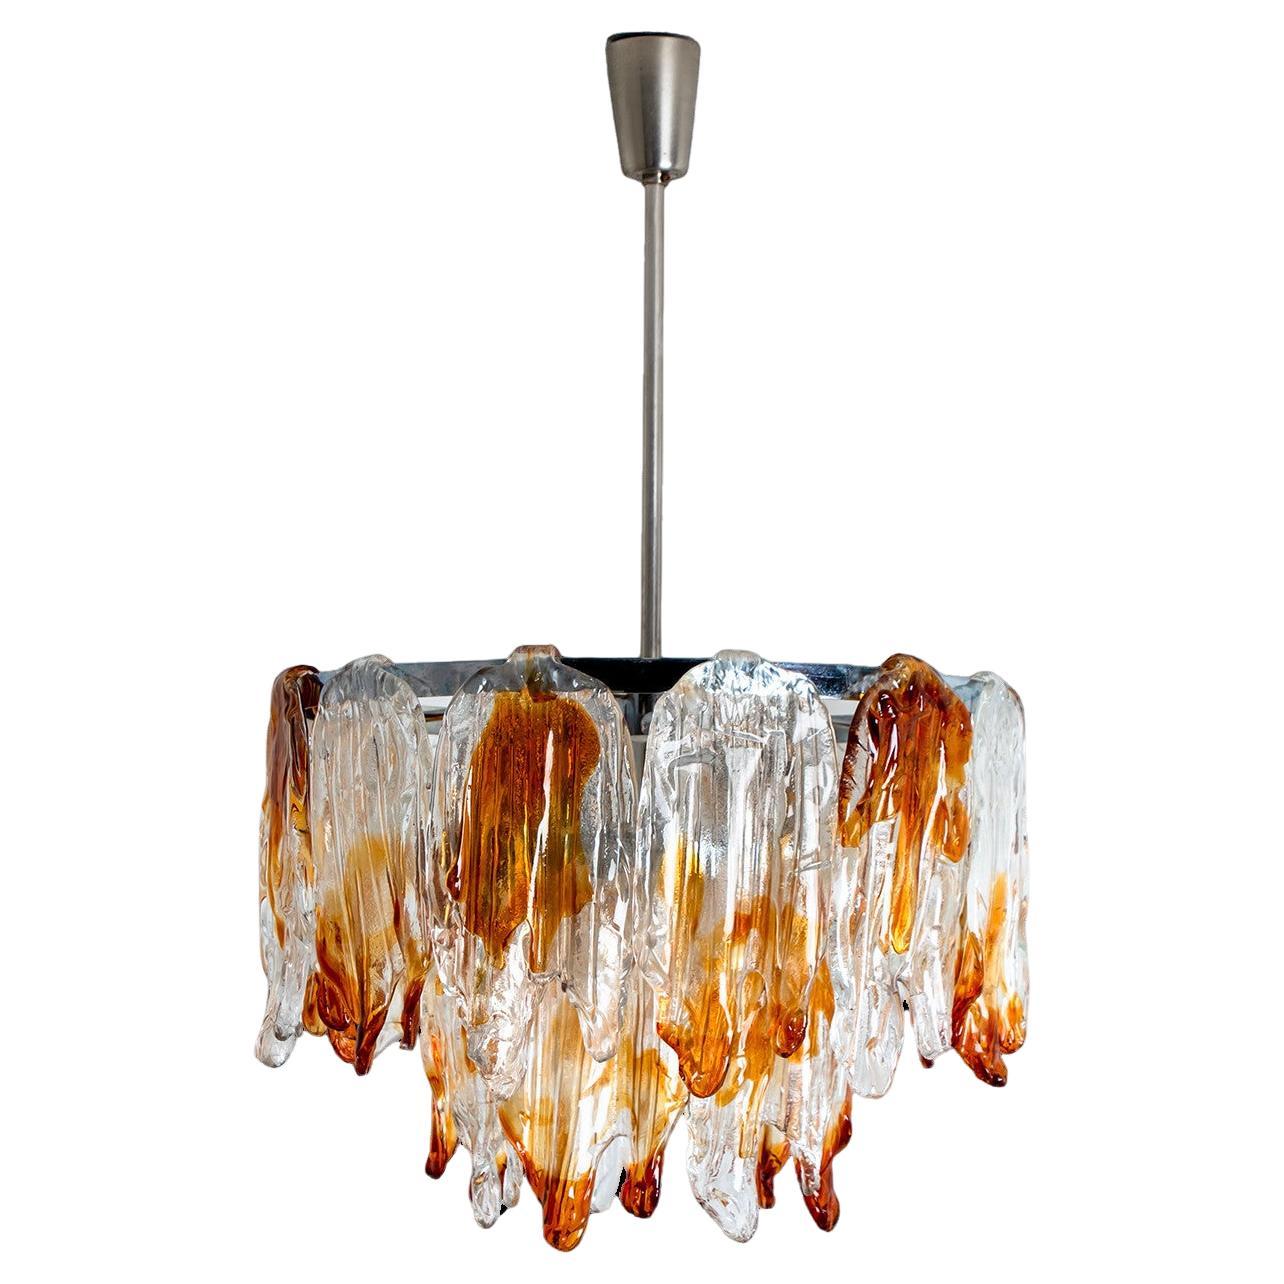 Orange and Clear Murano Glass Chandelier by Mazzega, 1960s